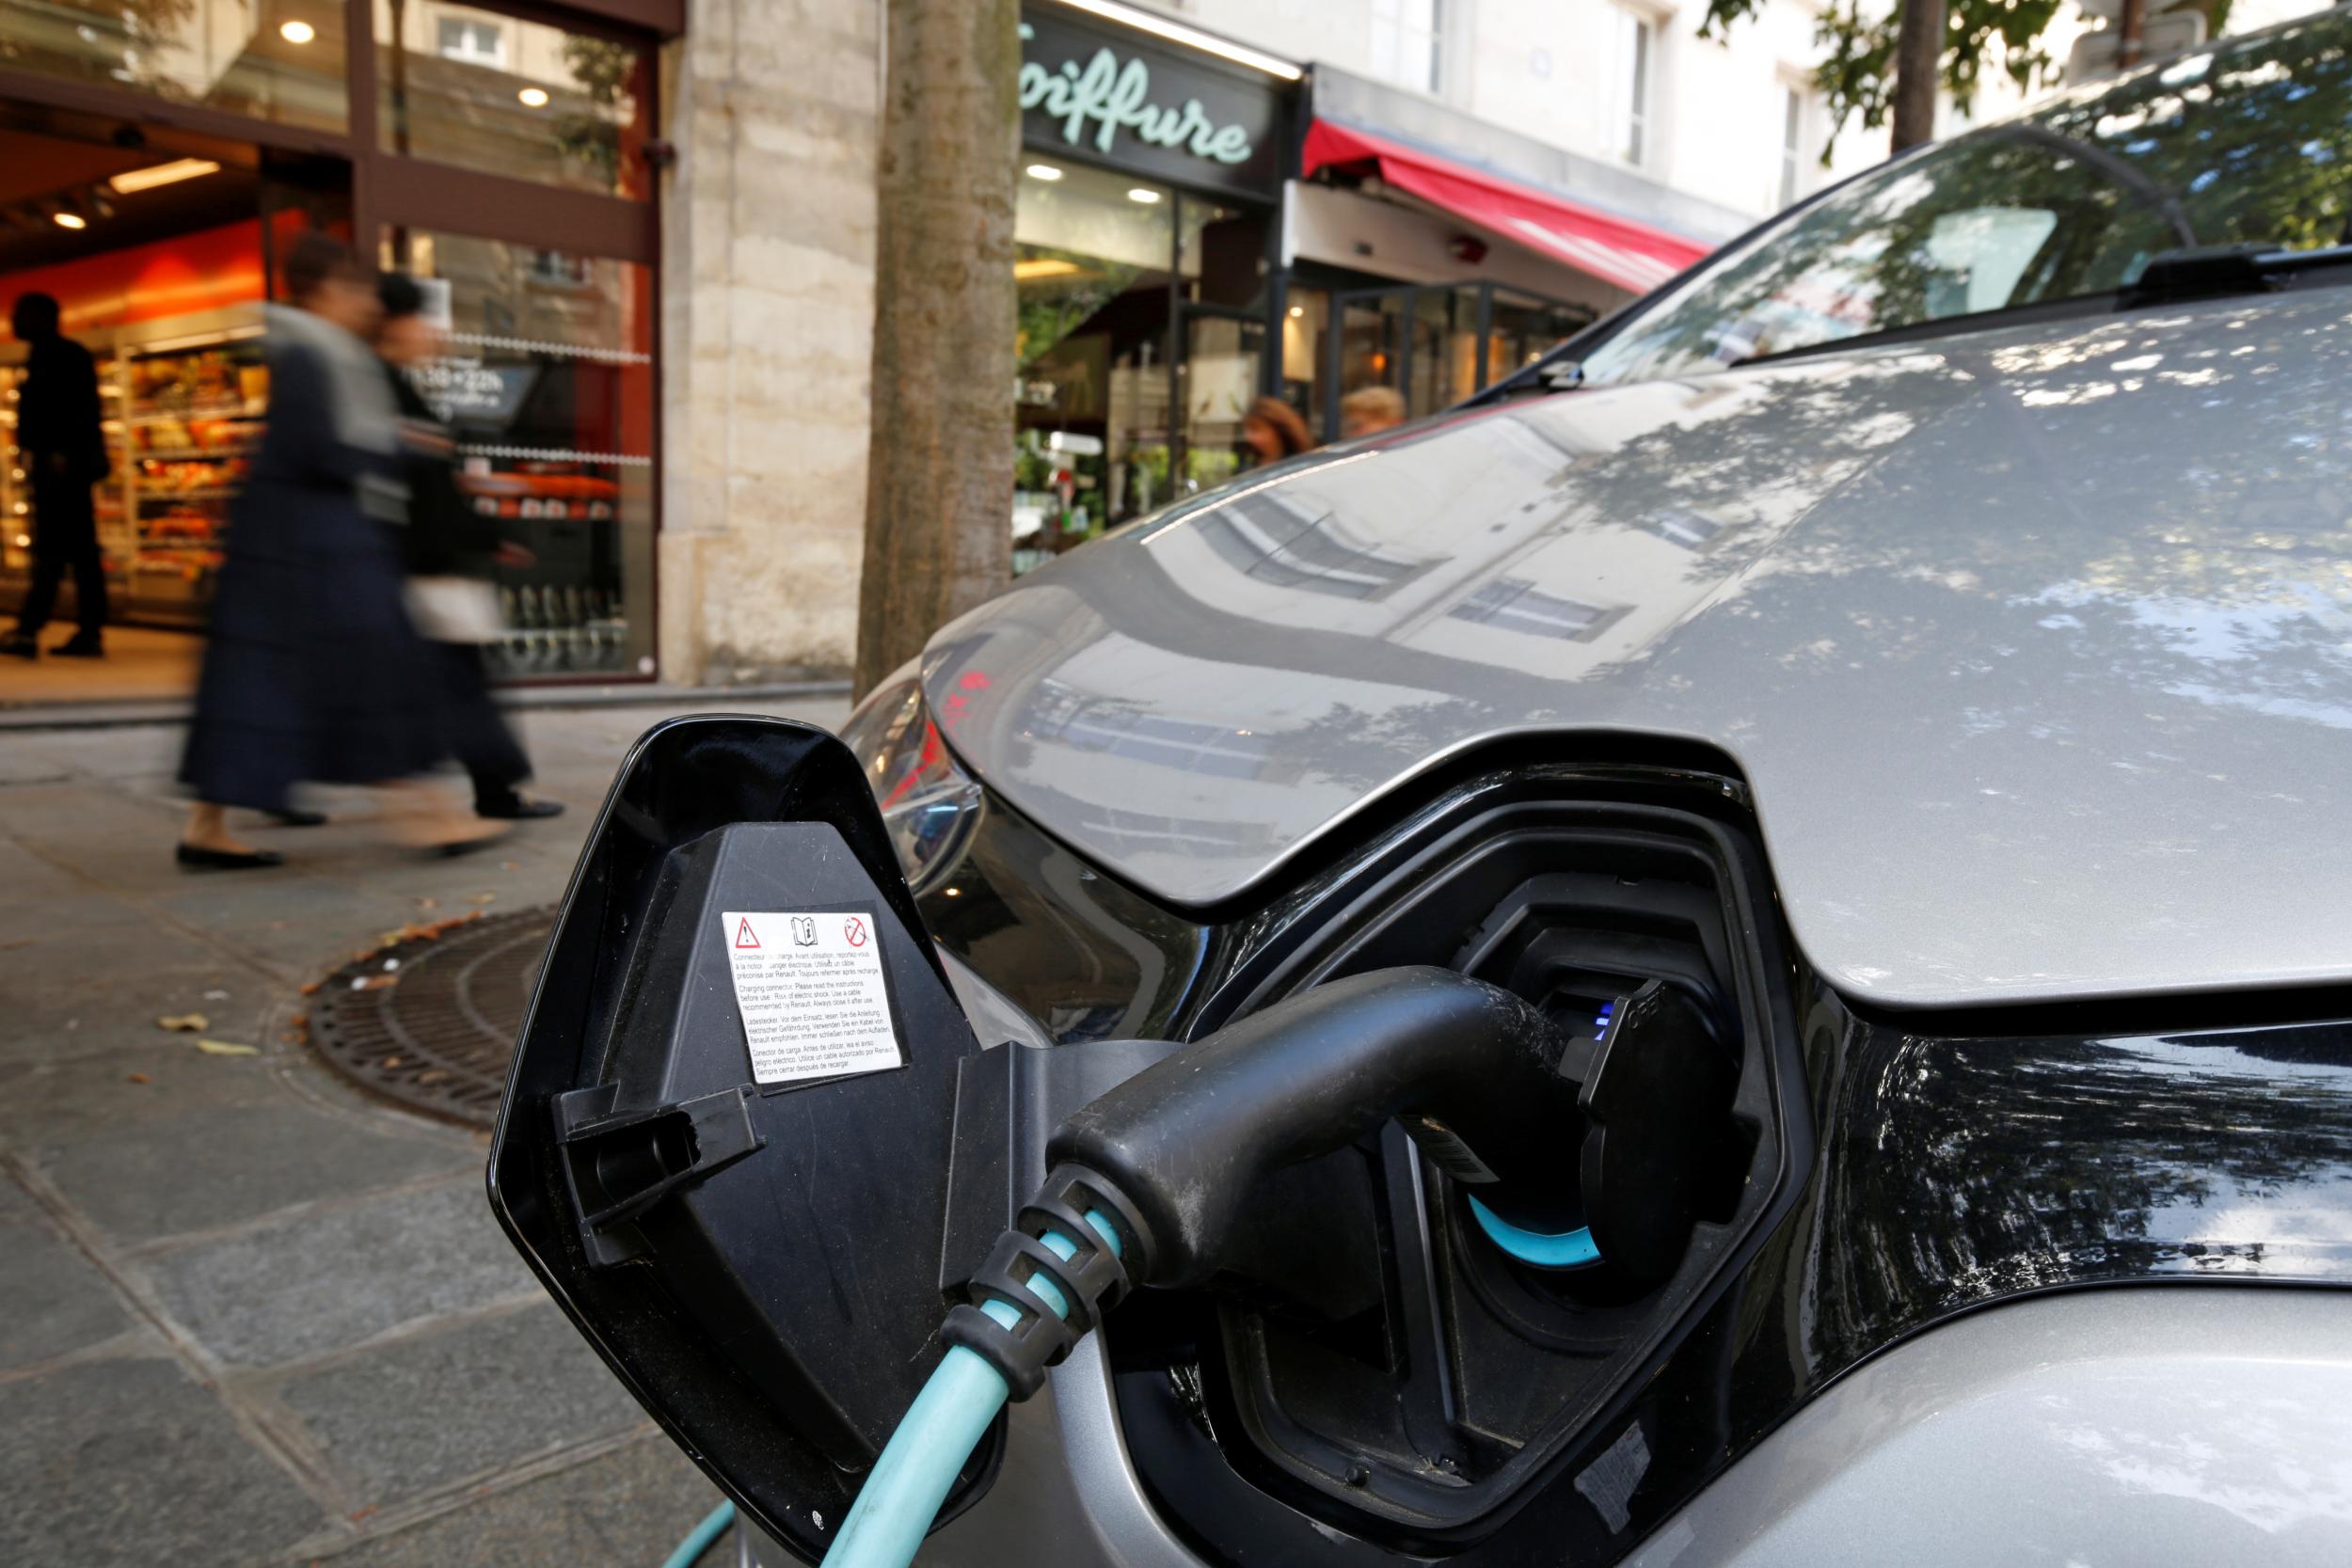 There are fewer than 100,000 public charging points available in Europe today